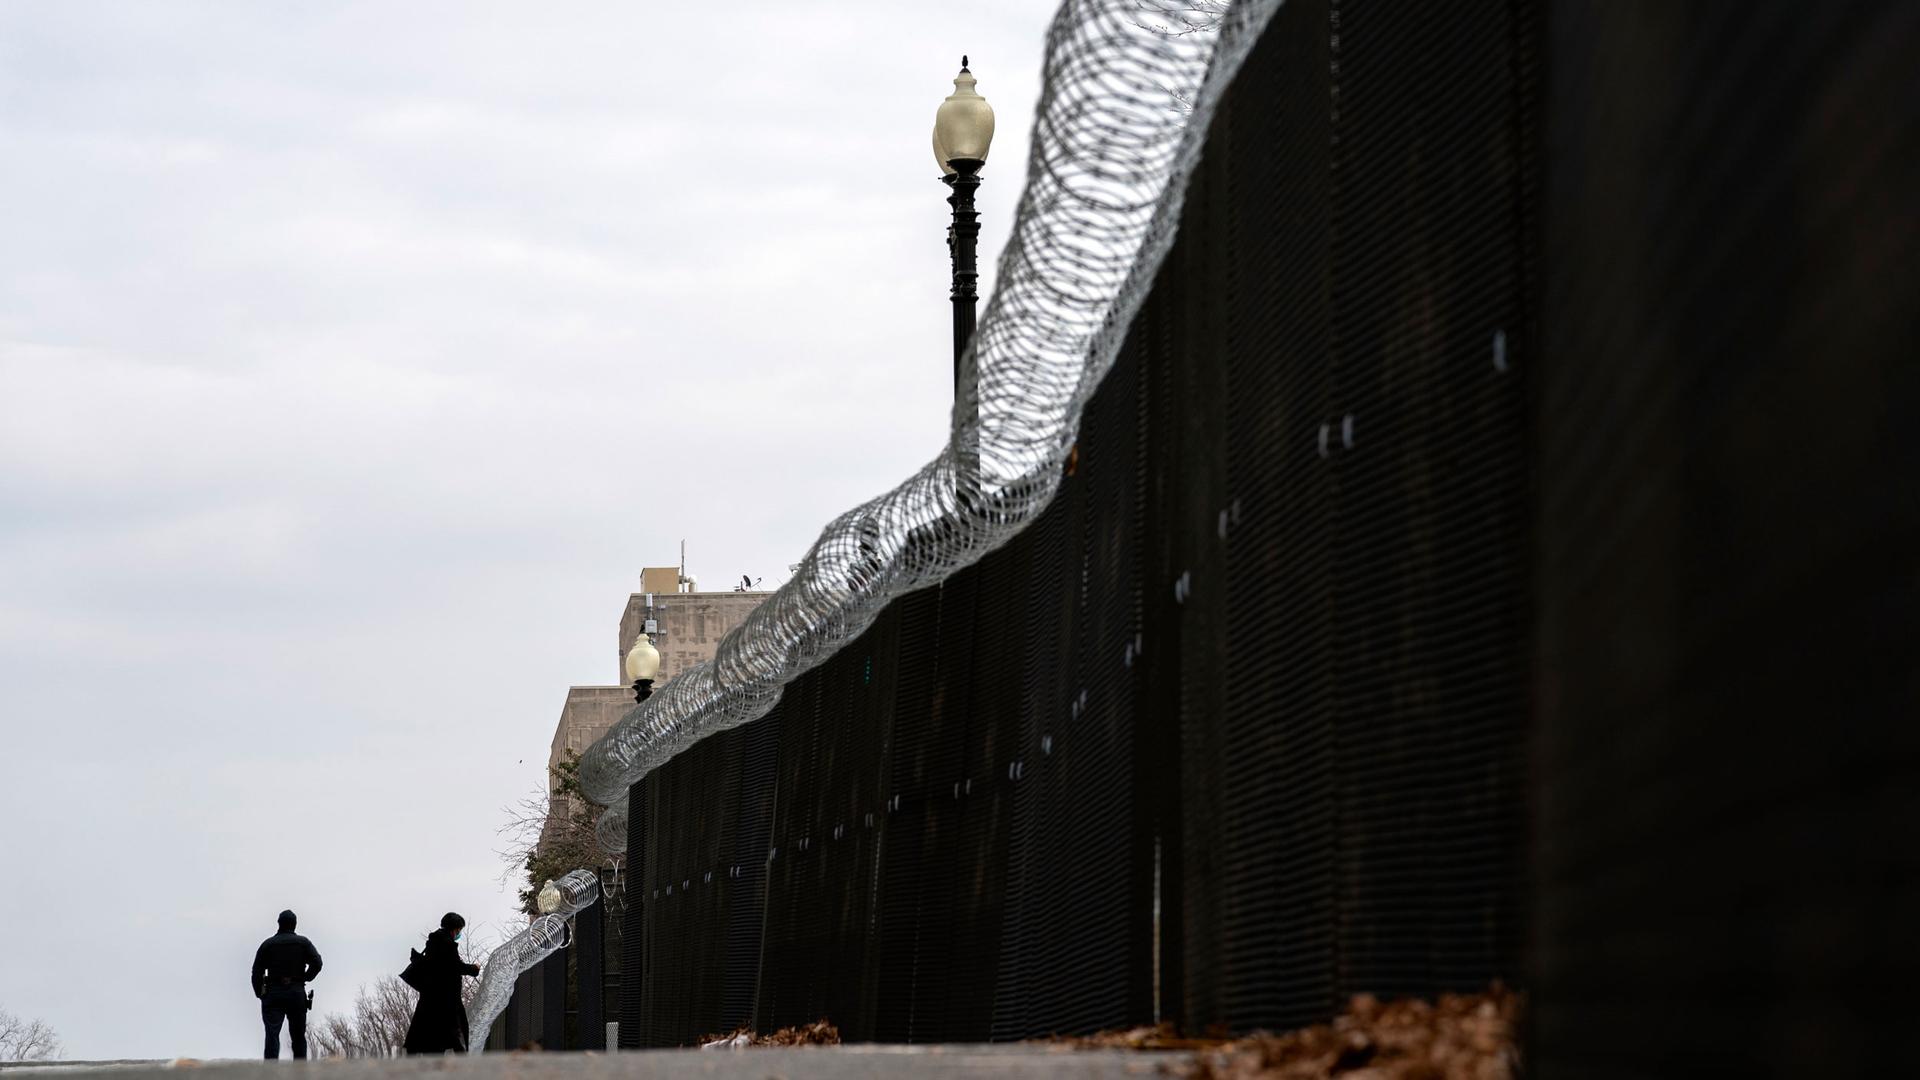 A tall fence is shown with barbed wire running along the top and a dark sheet obstructing the view through with two people shown in the distance.